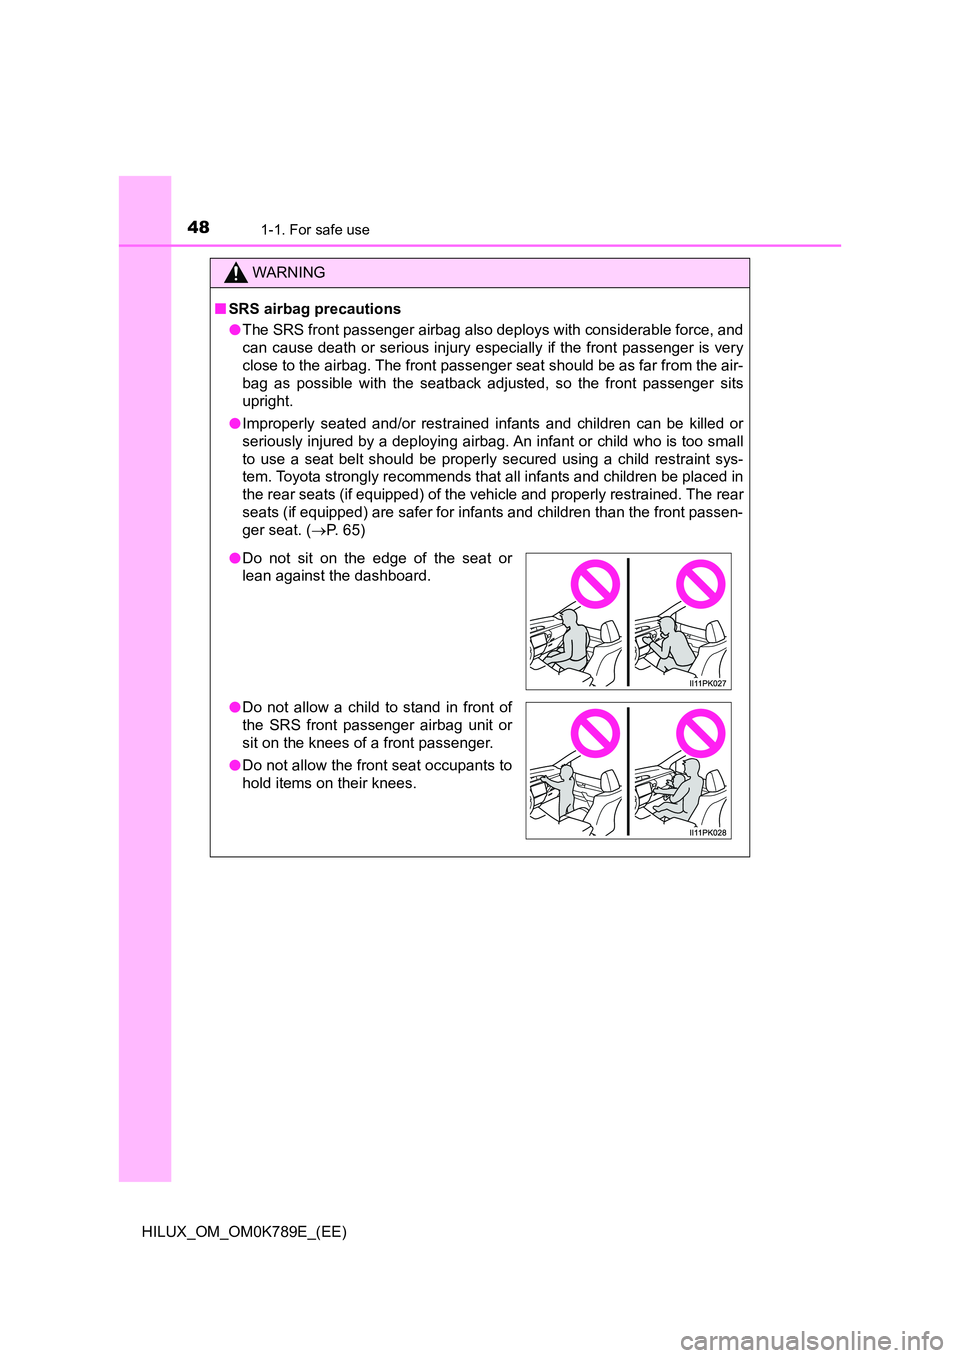 TOYOTA HILUX 2023  Owners Manual 481-1. For safe use
HILUX_OM_OM0K789E_(EE)
WARNING
■SRS airbag precautions 
● The SRS front passenger airbag also deploys with considerable force, and 
can cause death or serious injury especially